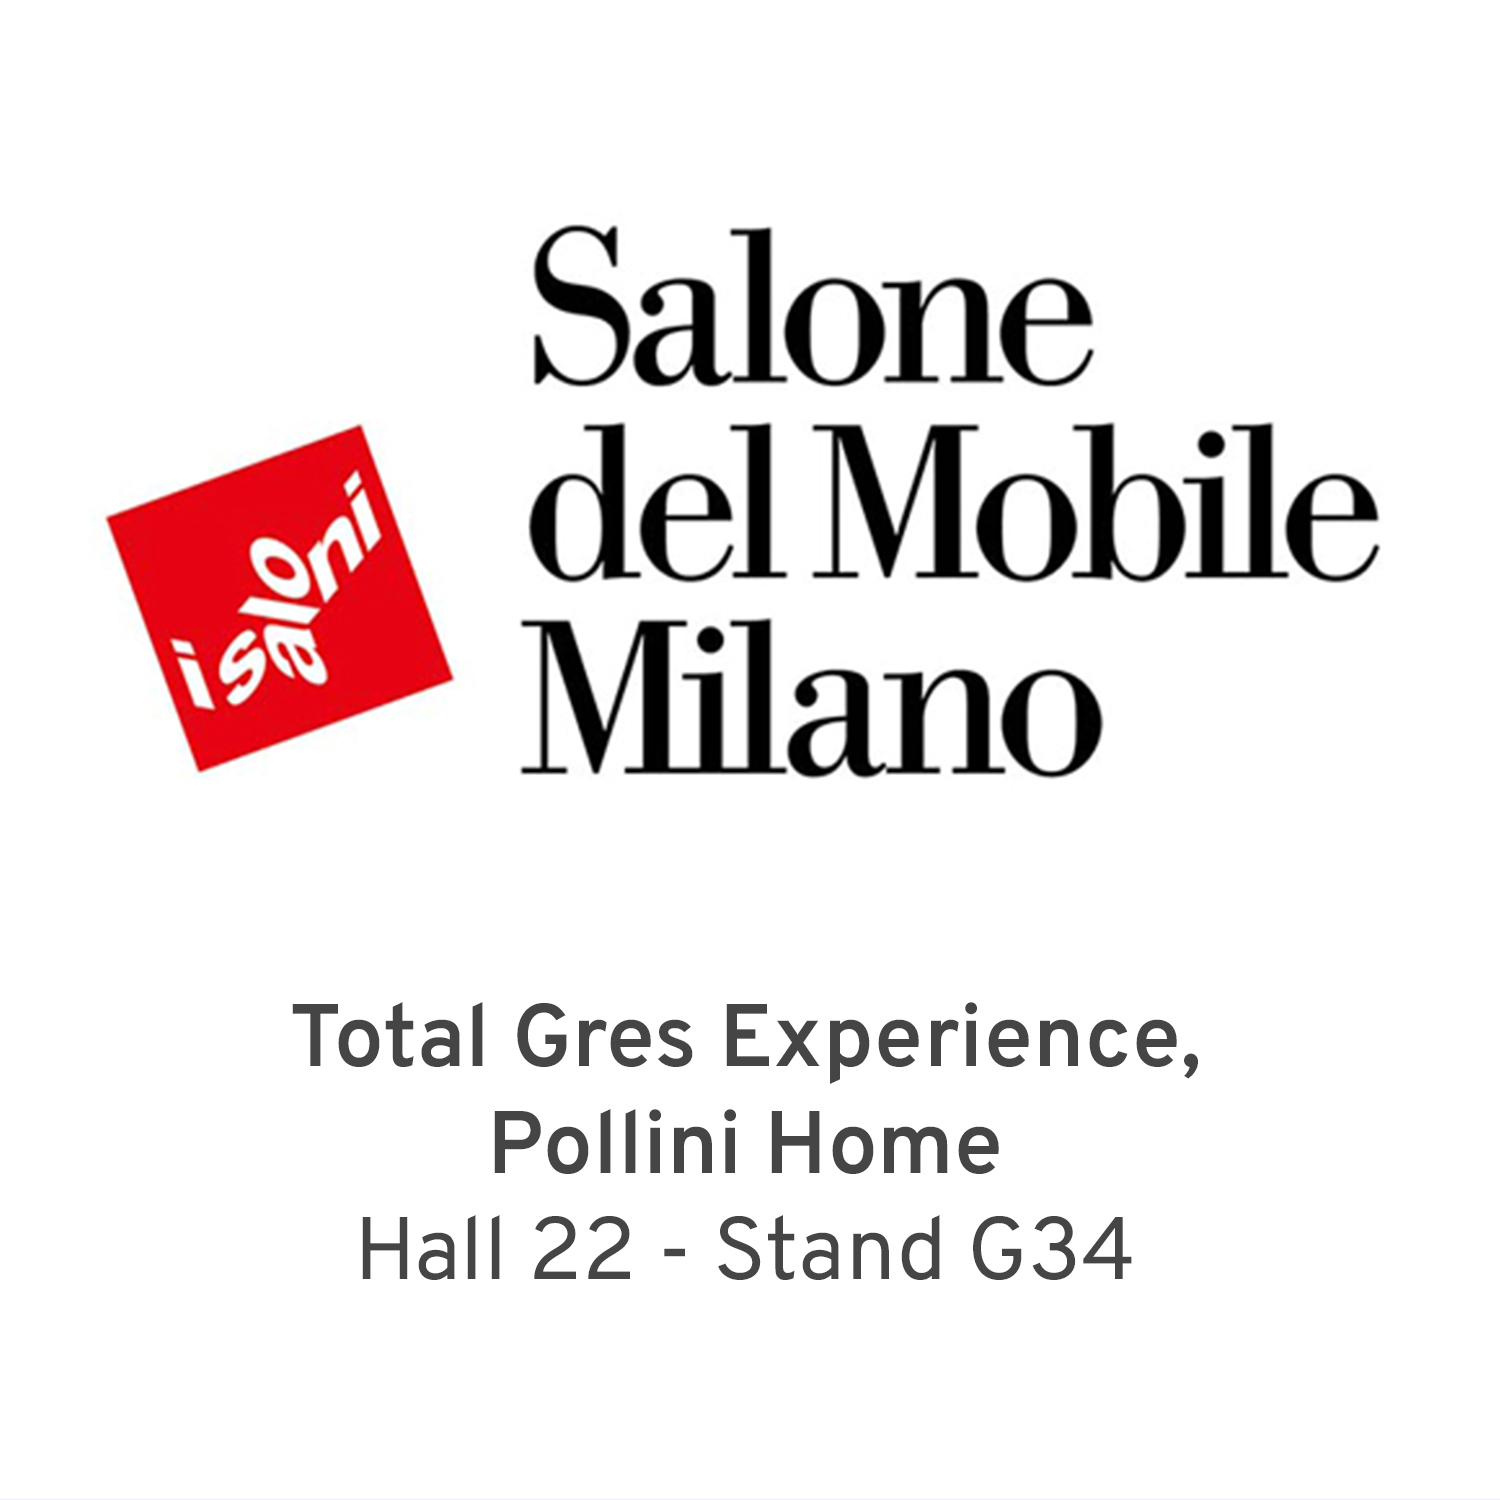 Total Gres Experience – Pollini Home